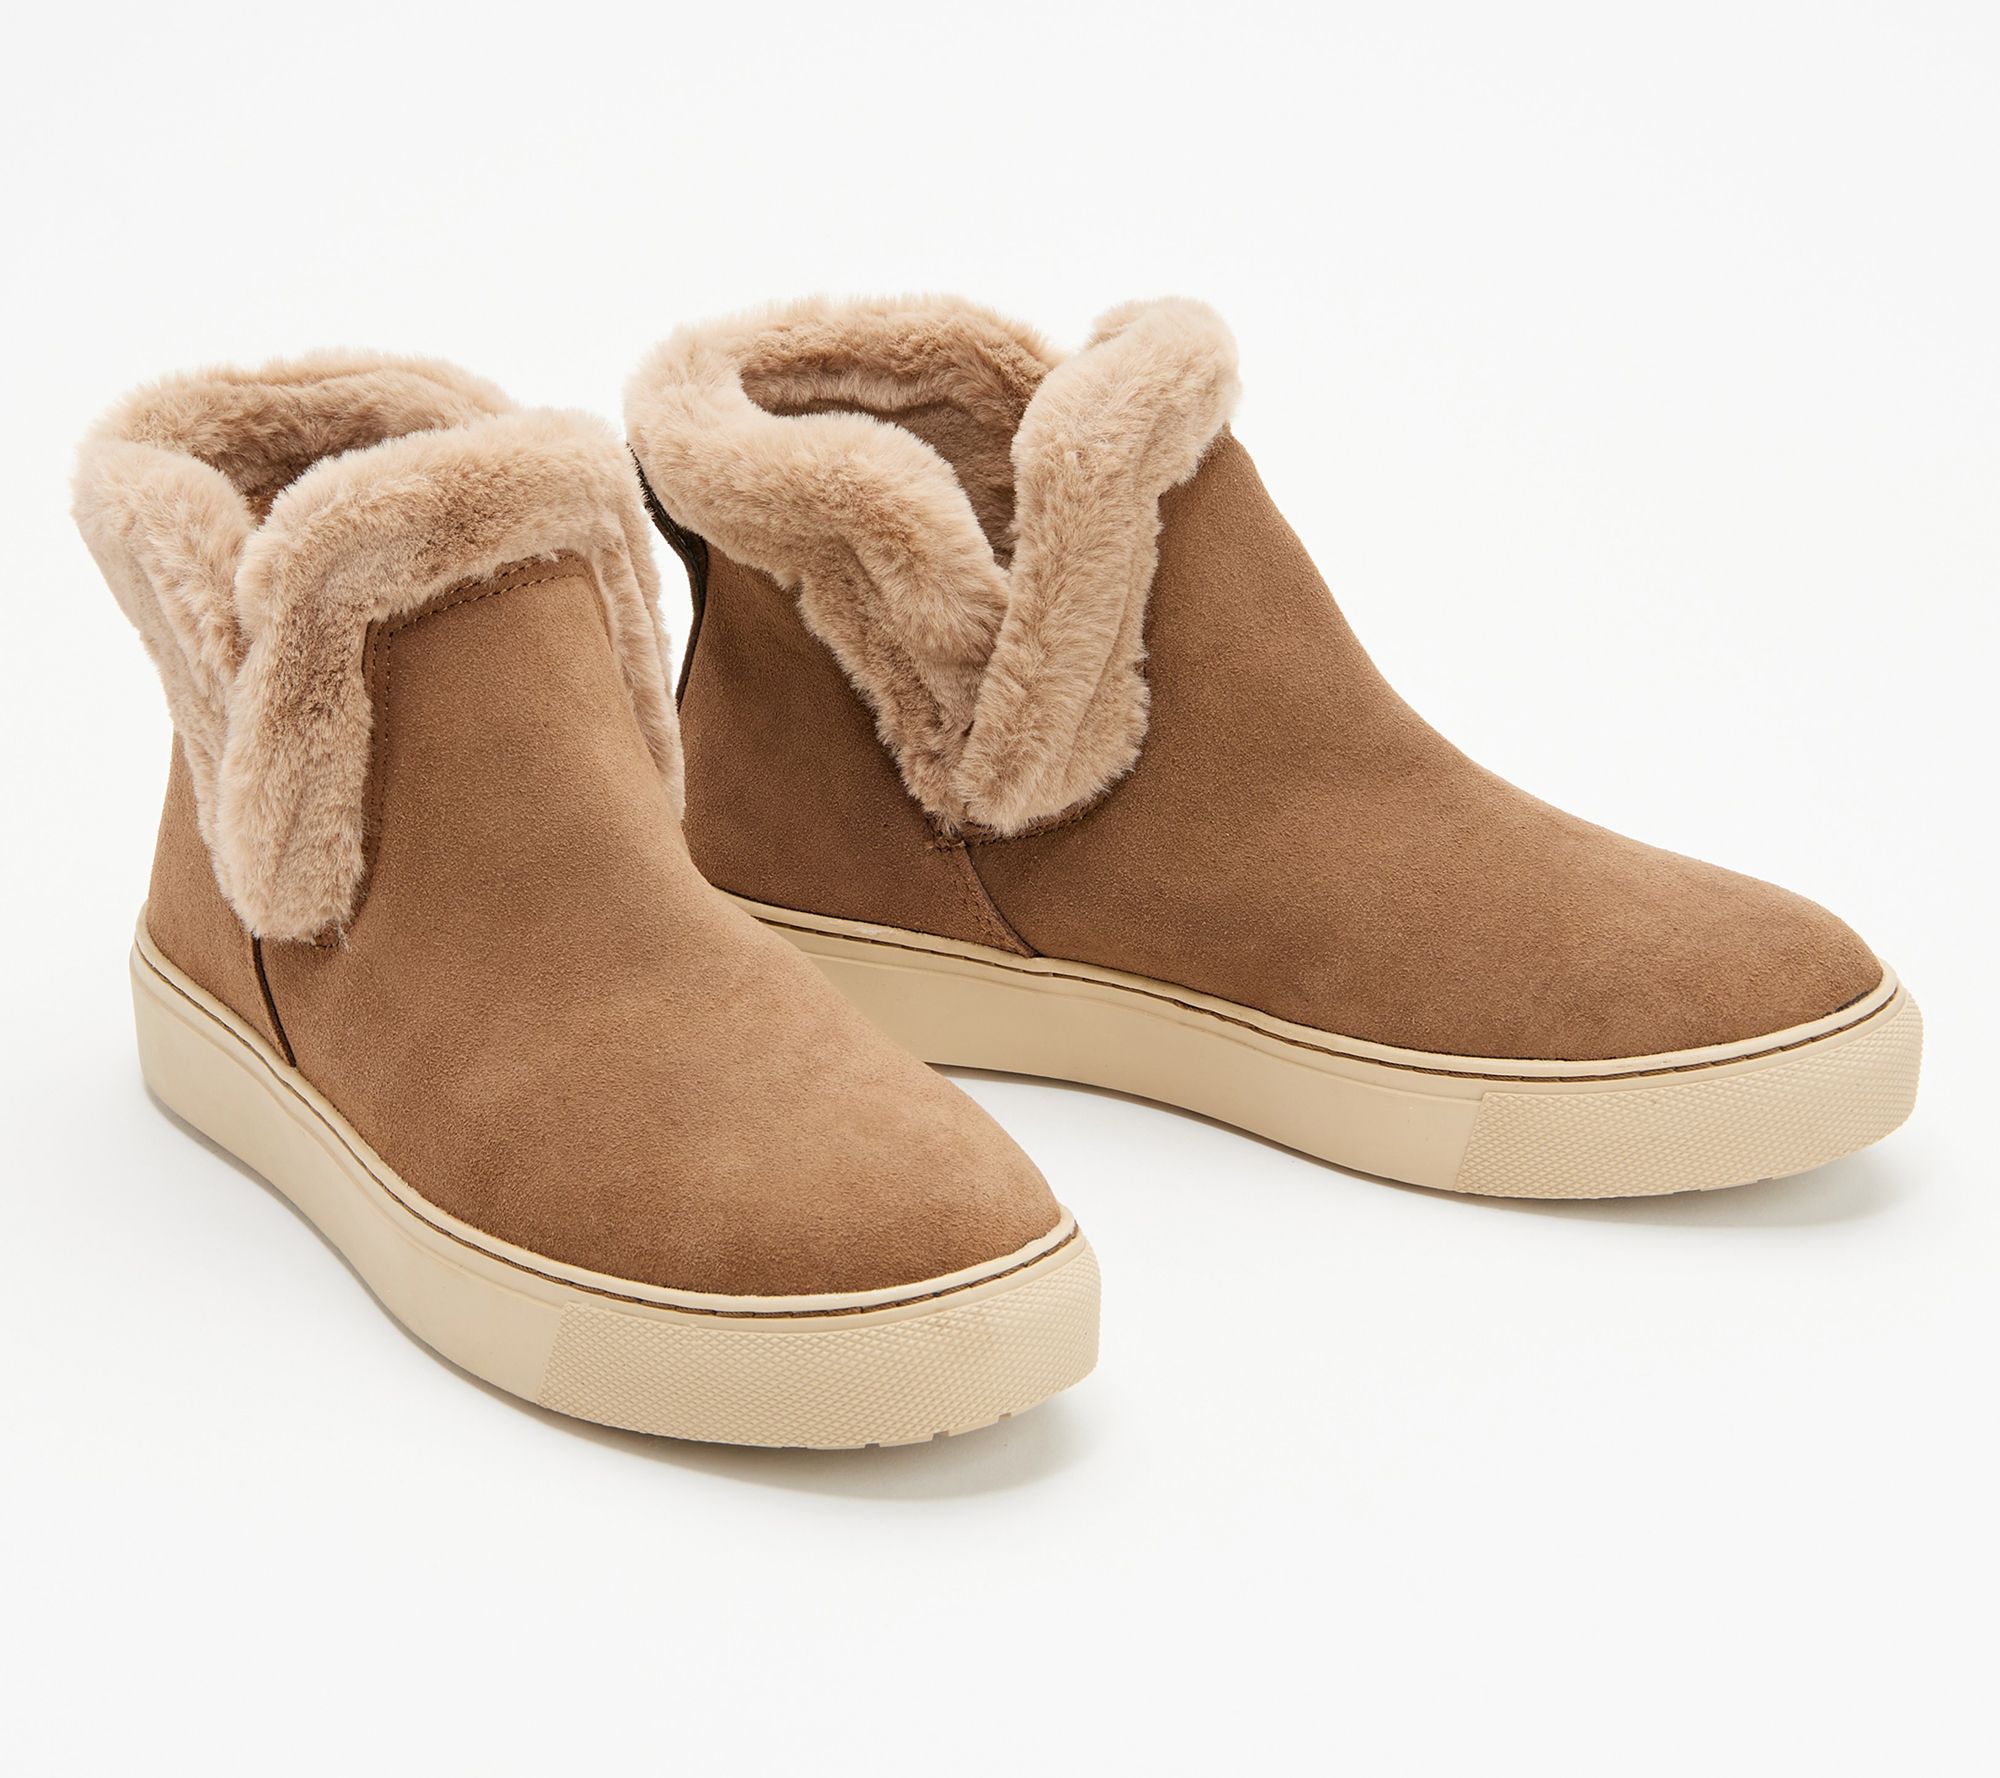 Cougar Fur Ankle Boots Duffy -